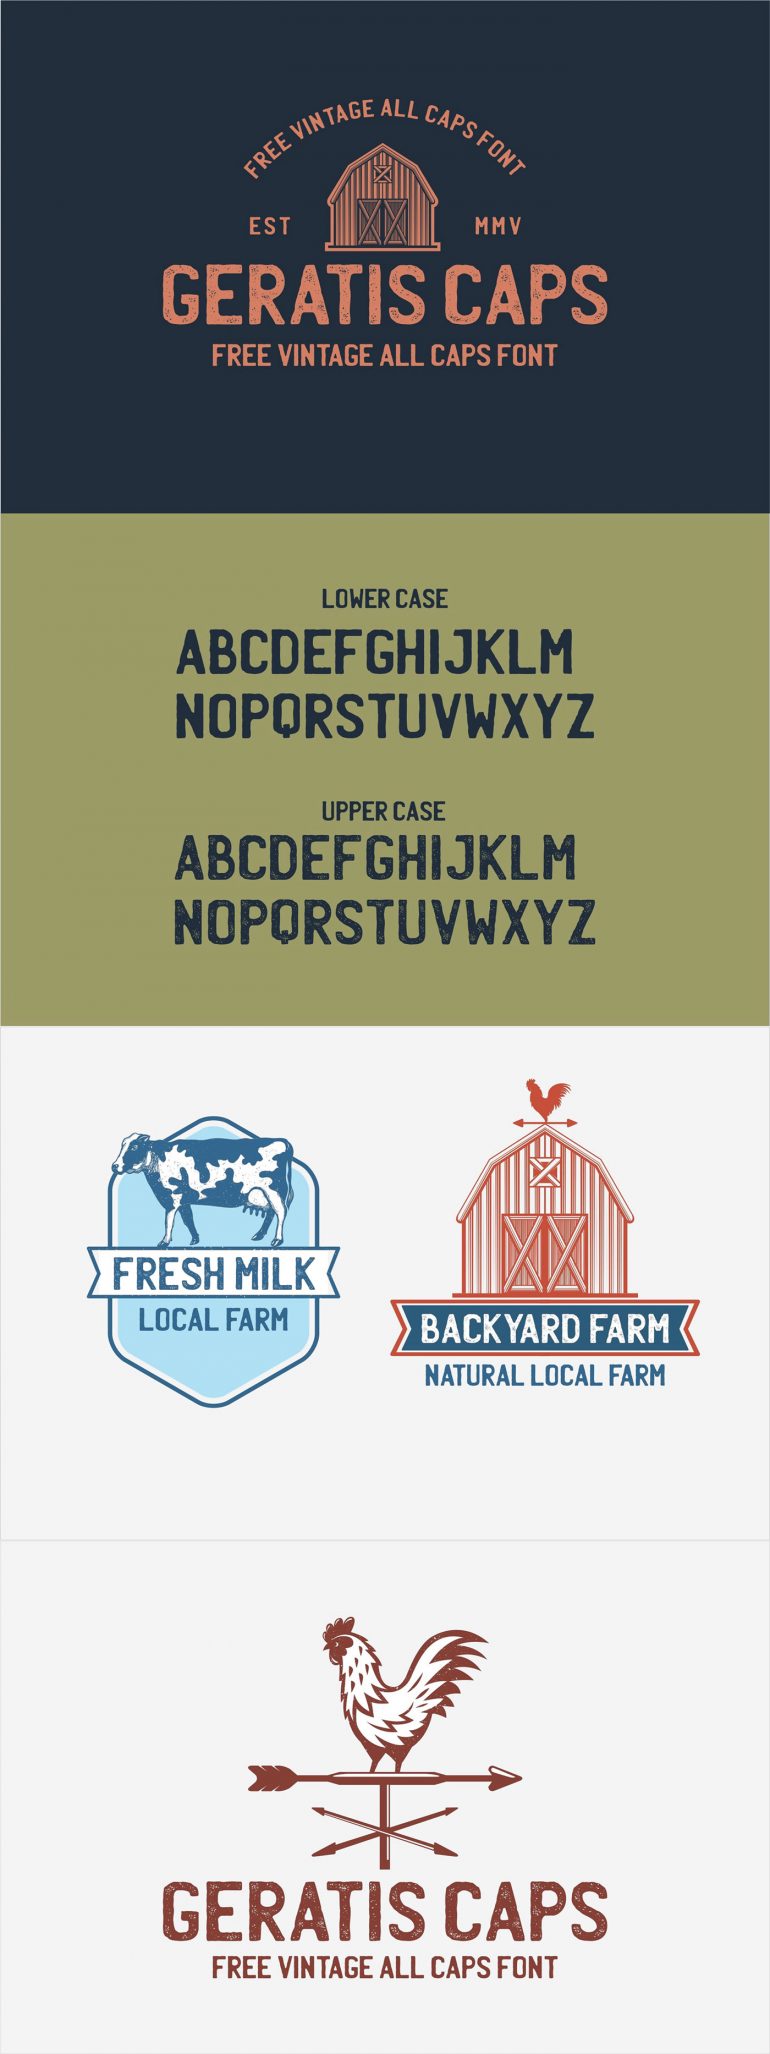 Free downloadable all caps fonts